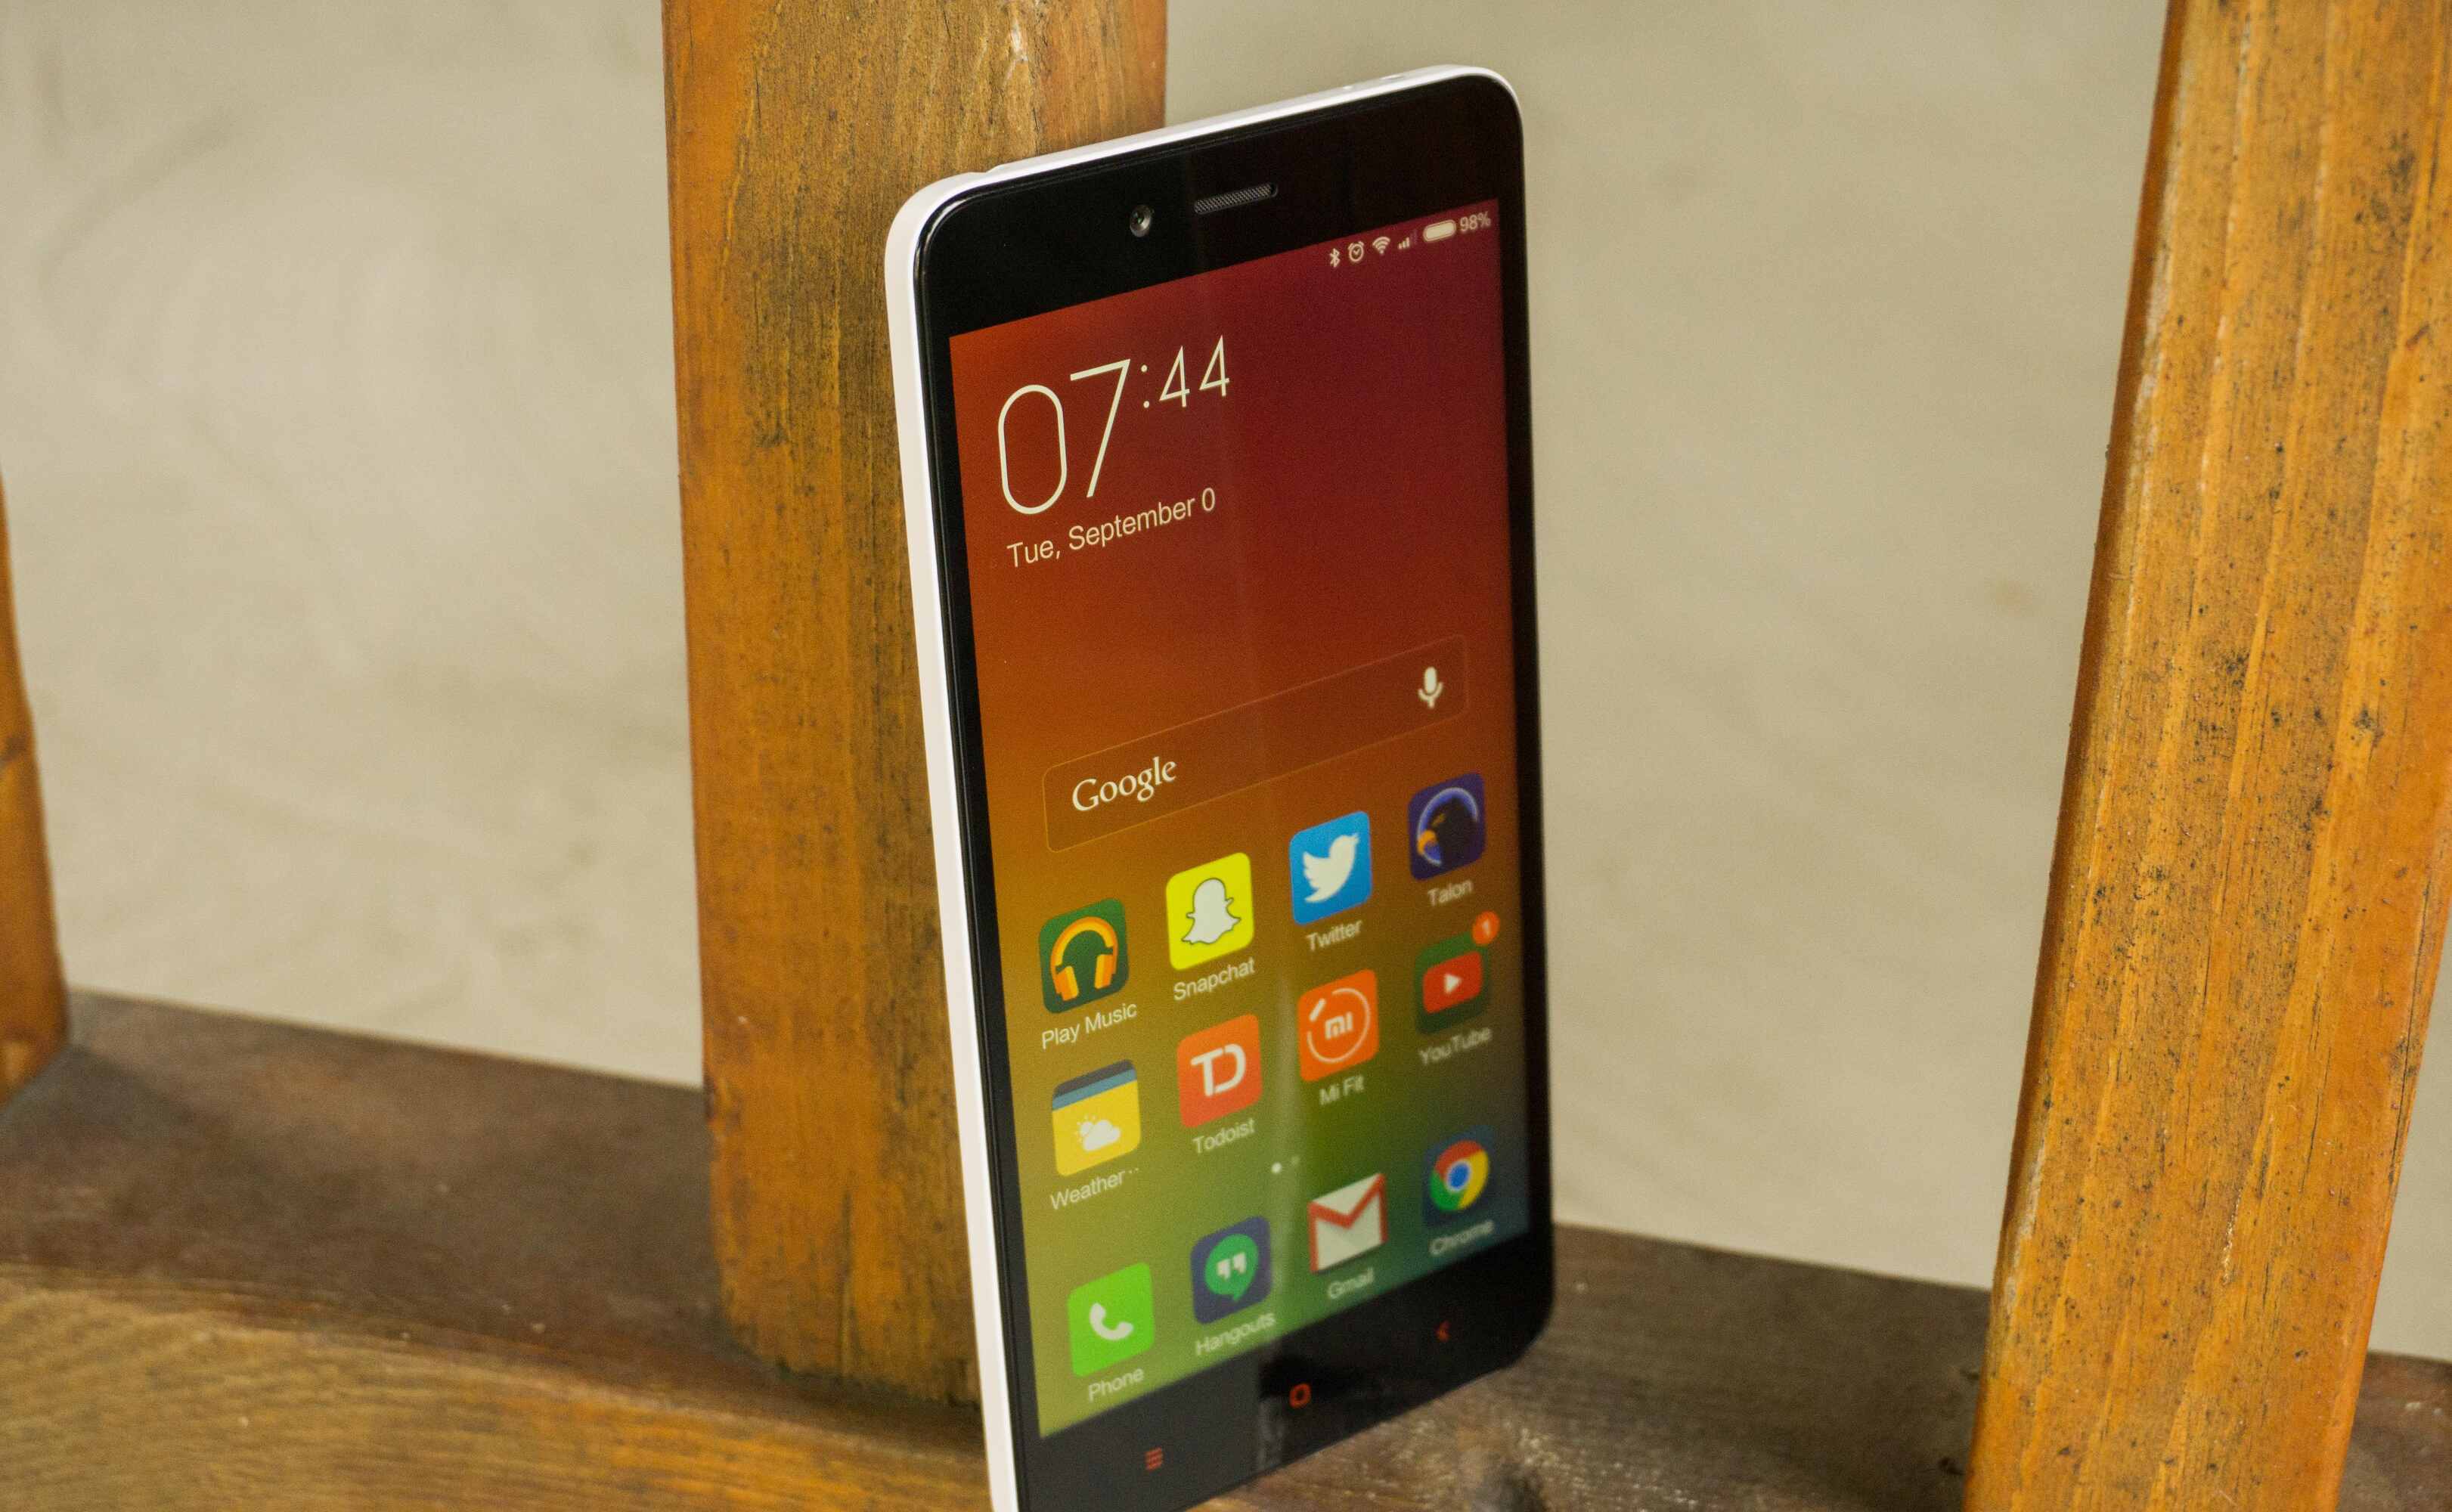 Xiaomi Redmi Note 2: Overview Of Available Services